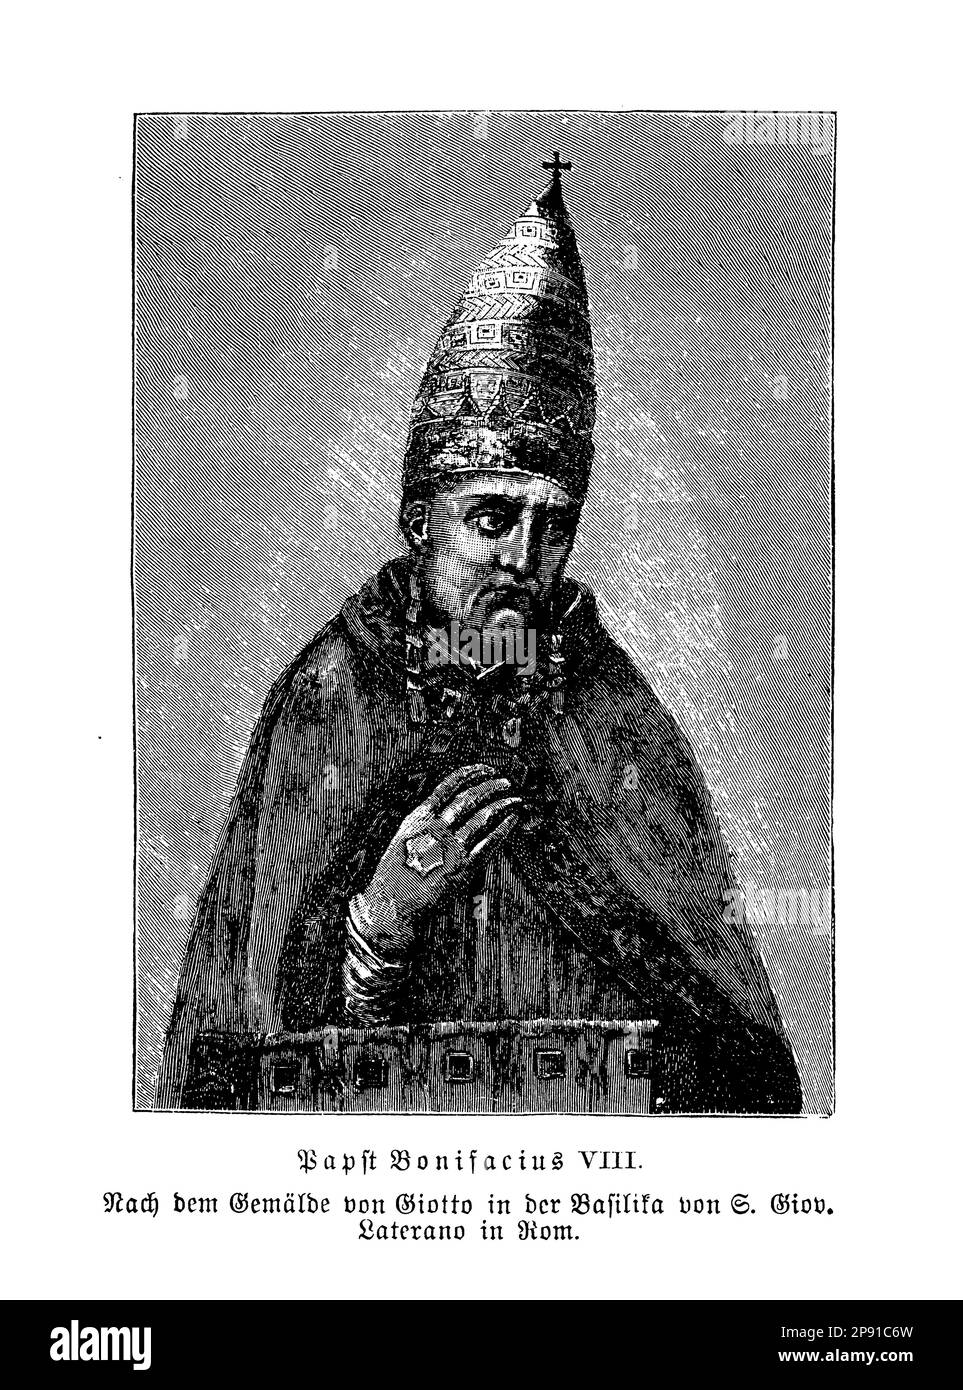 Pope Bonifacius VIII was a medieval pontiff who wielded immense power, challenging the authority of secular rulers and promoting the supremacy of the papacy. He famously issued the Unam Sanctam, asserting the pope's temporal and spiritual authority over all Christendom Stock Photo